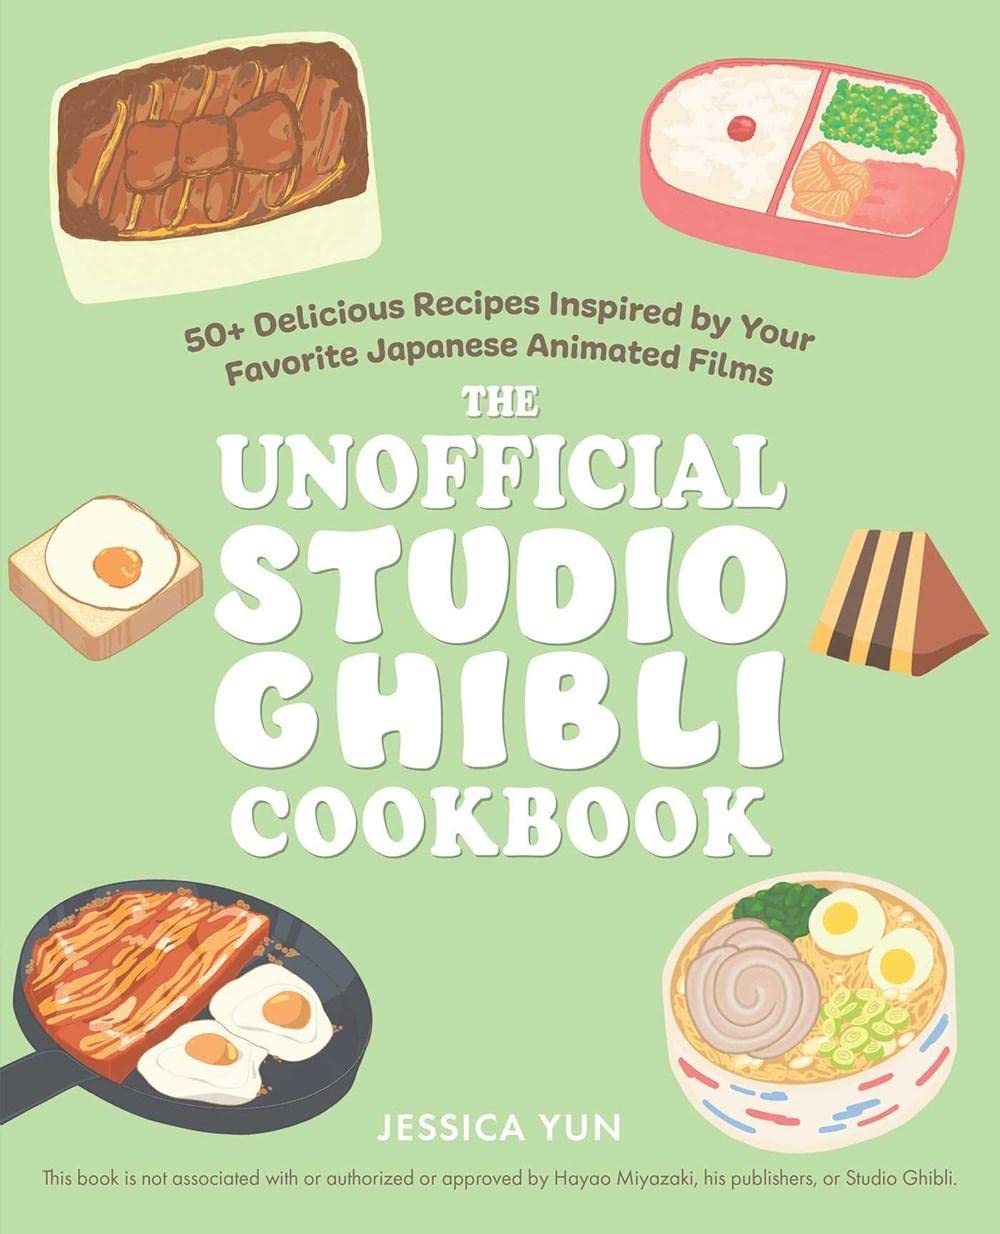 A graphic of the cover of The Unofficial Studio Ghibli Cookbook by Jessica Yun